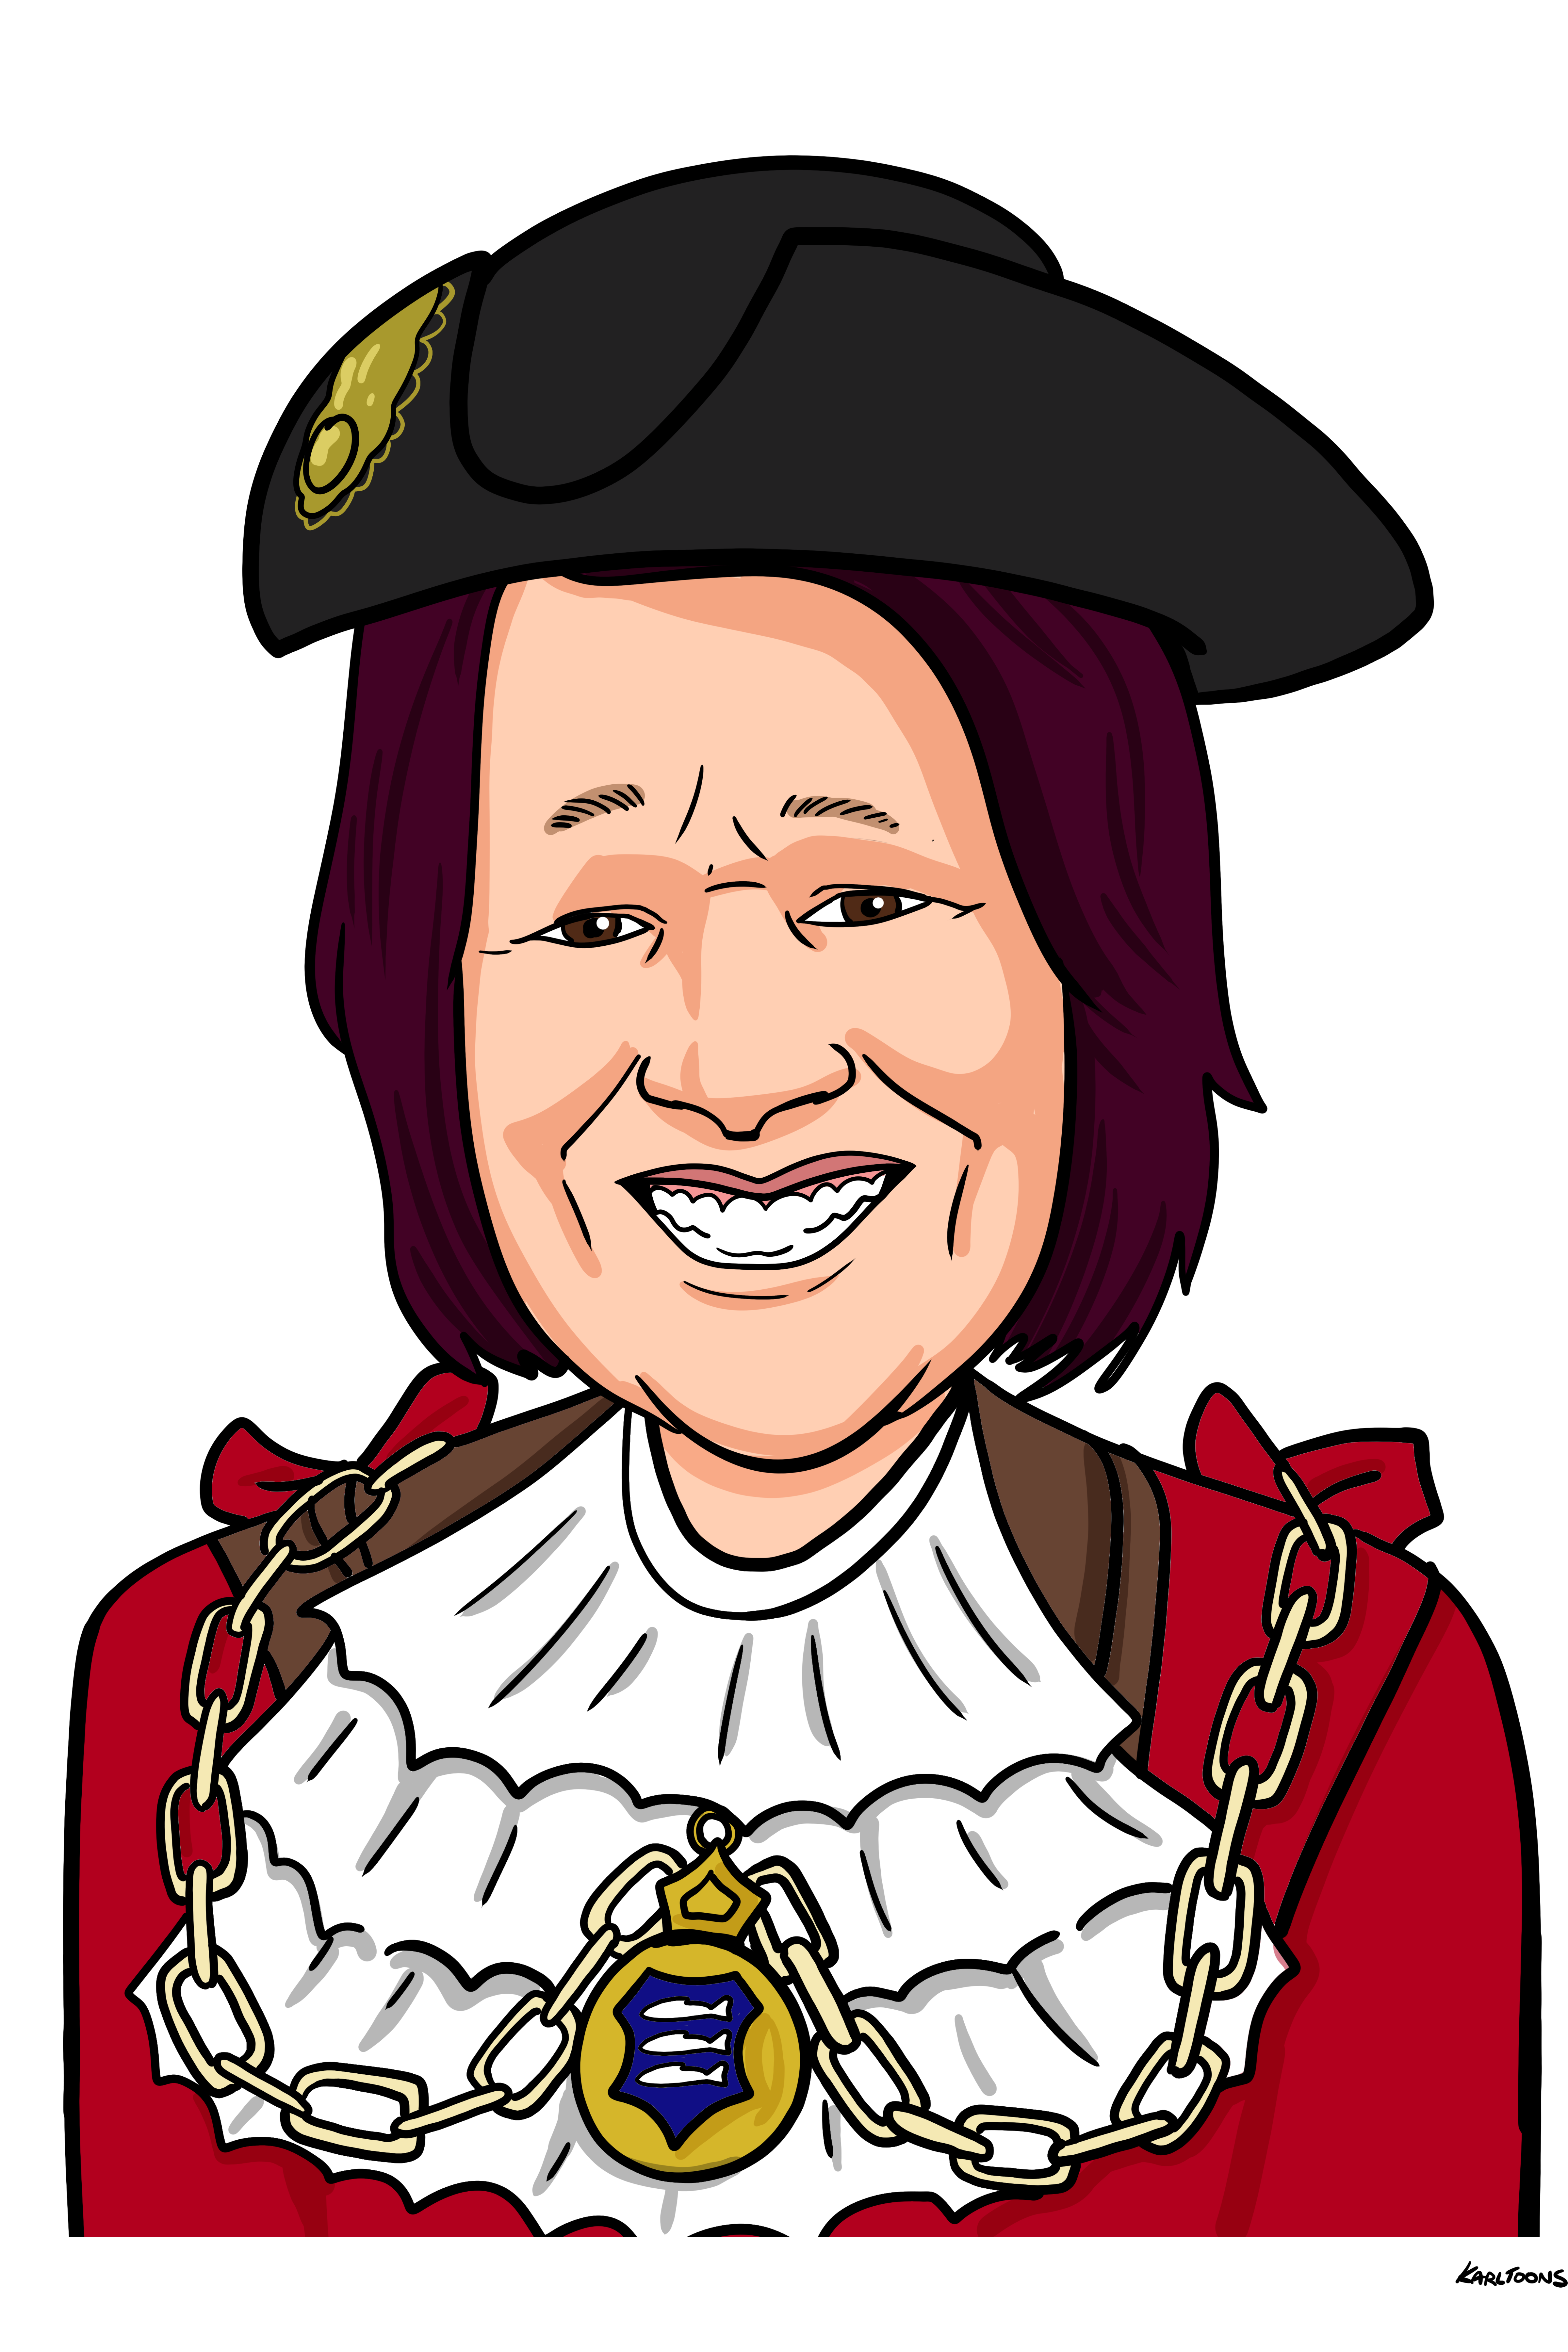 A charicature of the The Mayor of the Royal Borough of Kingston upon Thames